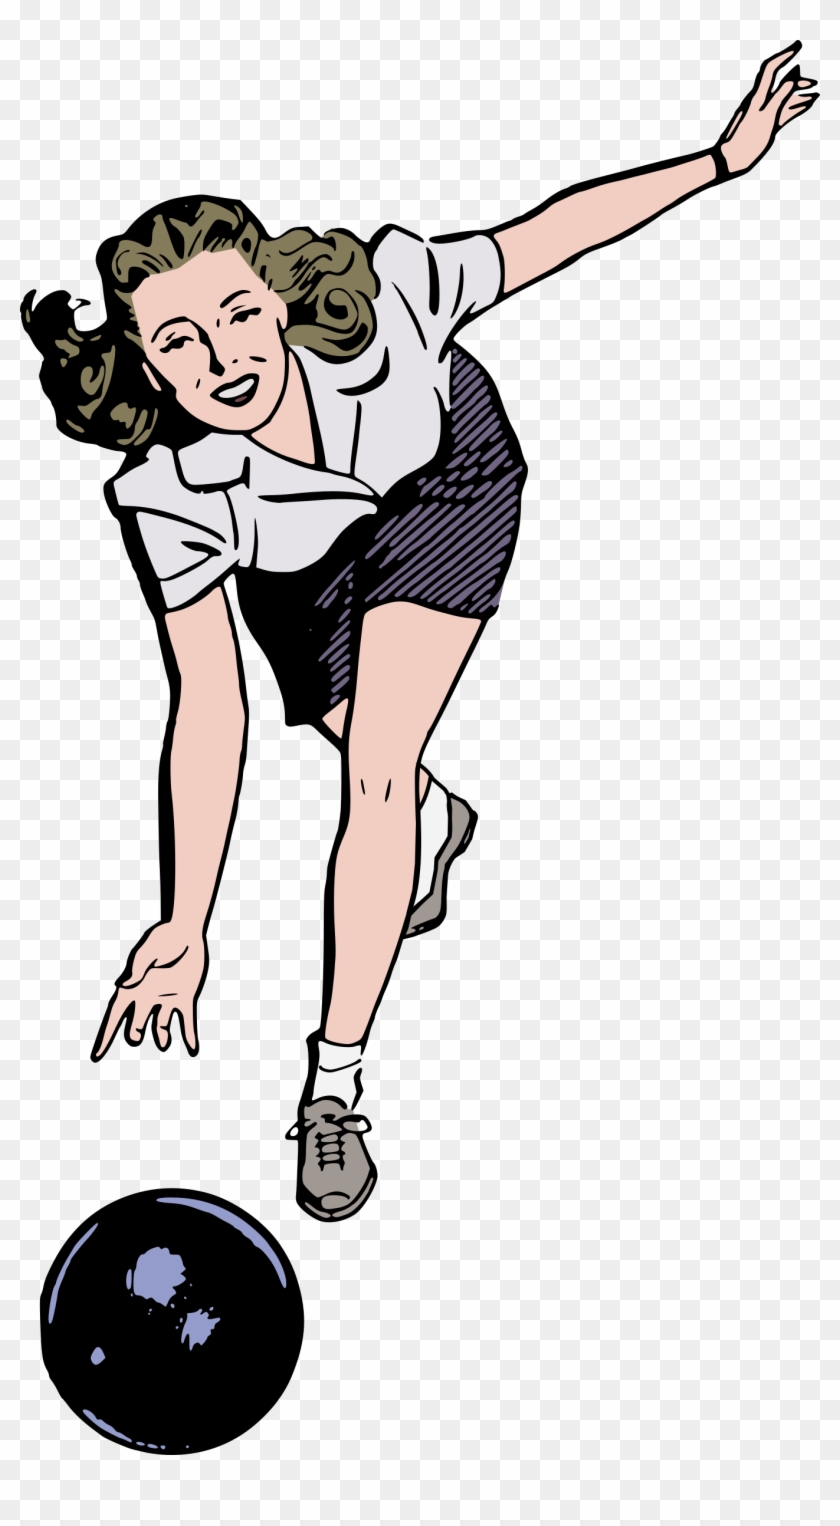 This Free Icons Png Design Of Bowling Woman Colour Clipart #1175492